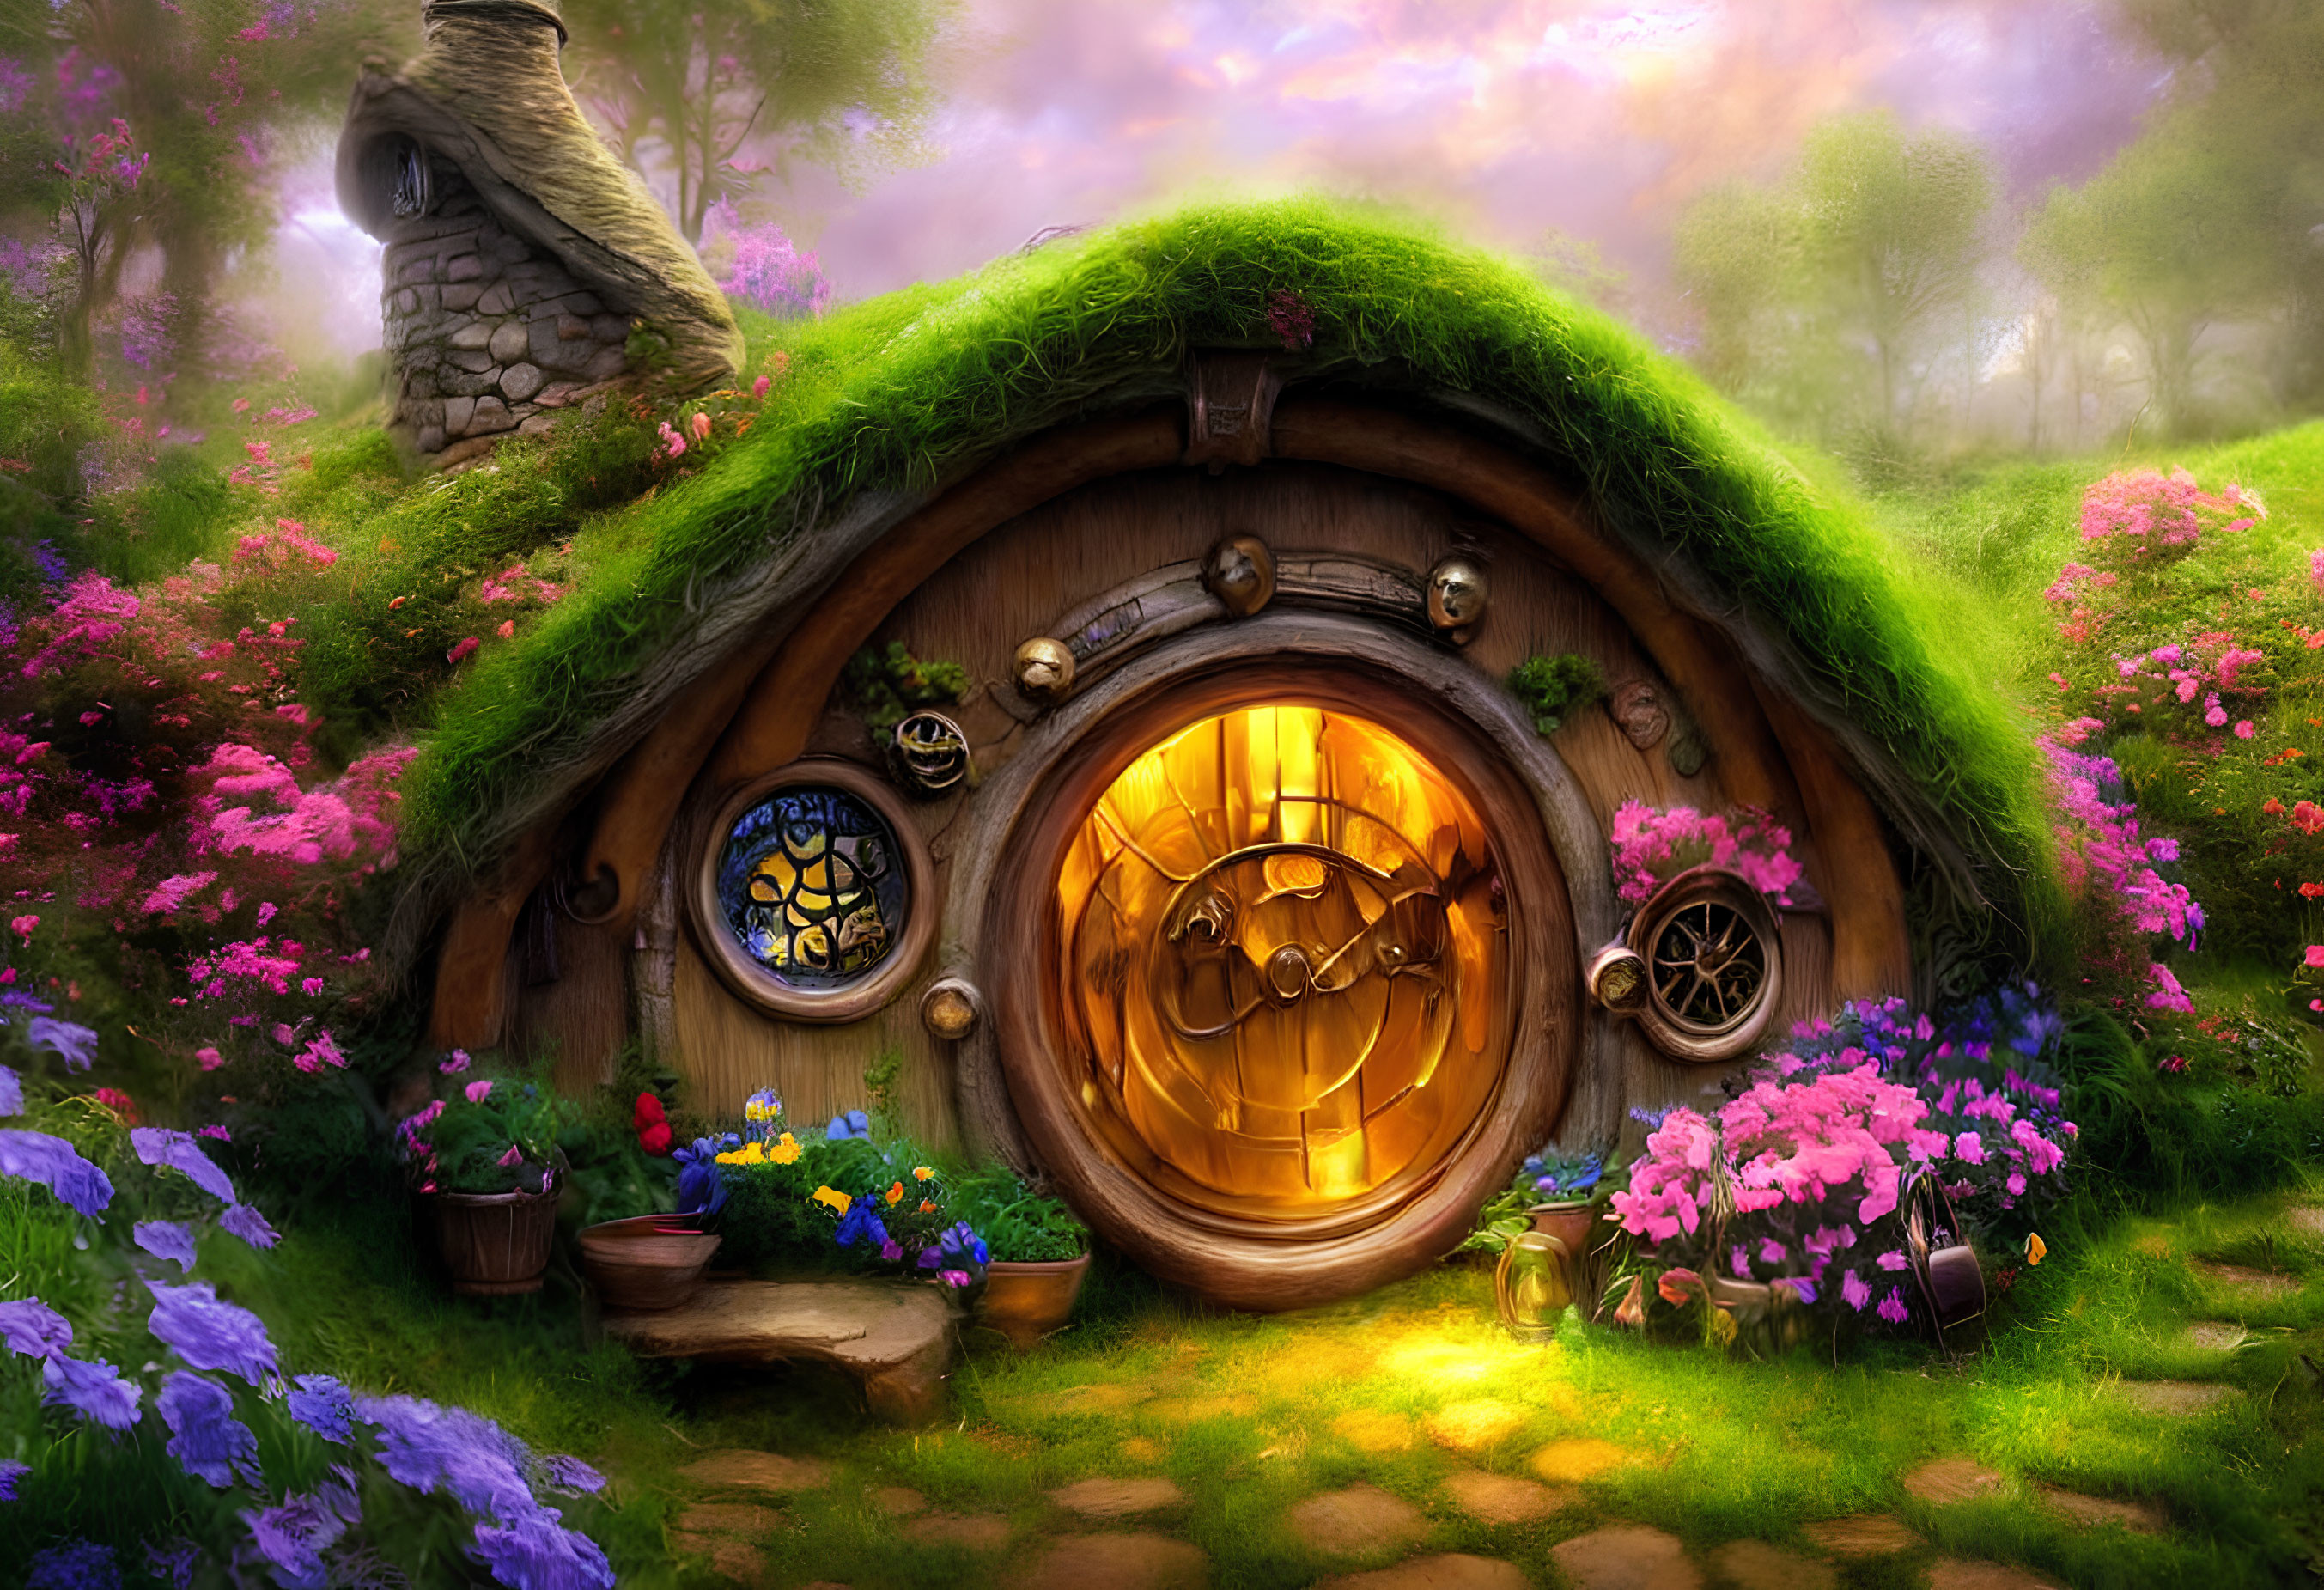 Whimsical round-door hobbit house with stone chimney and vibrant flowers